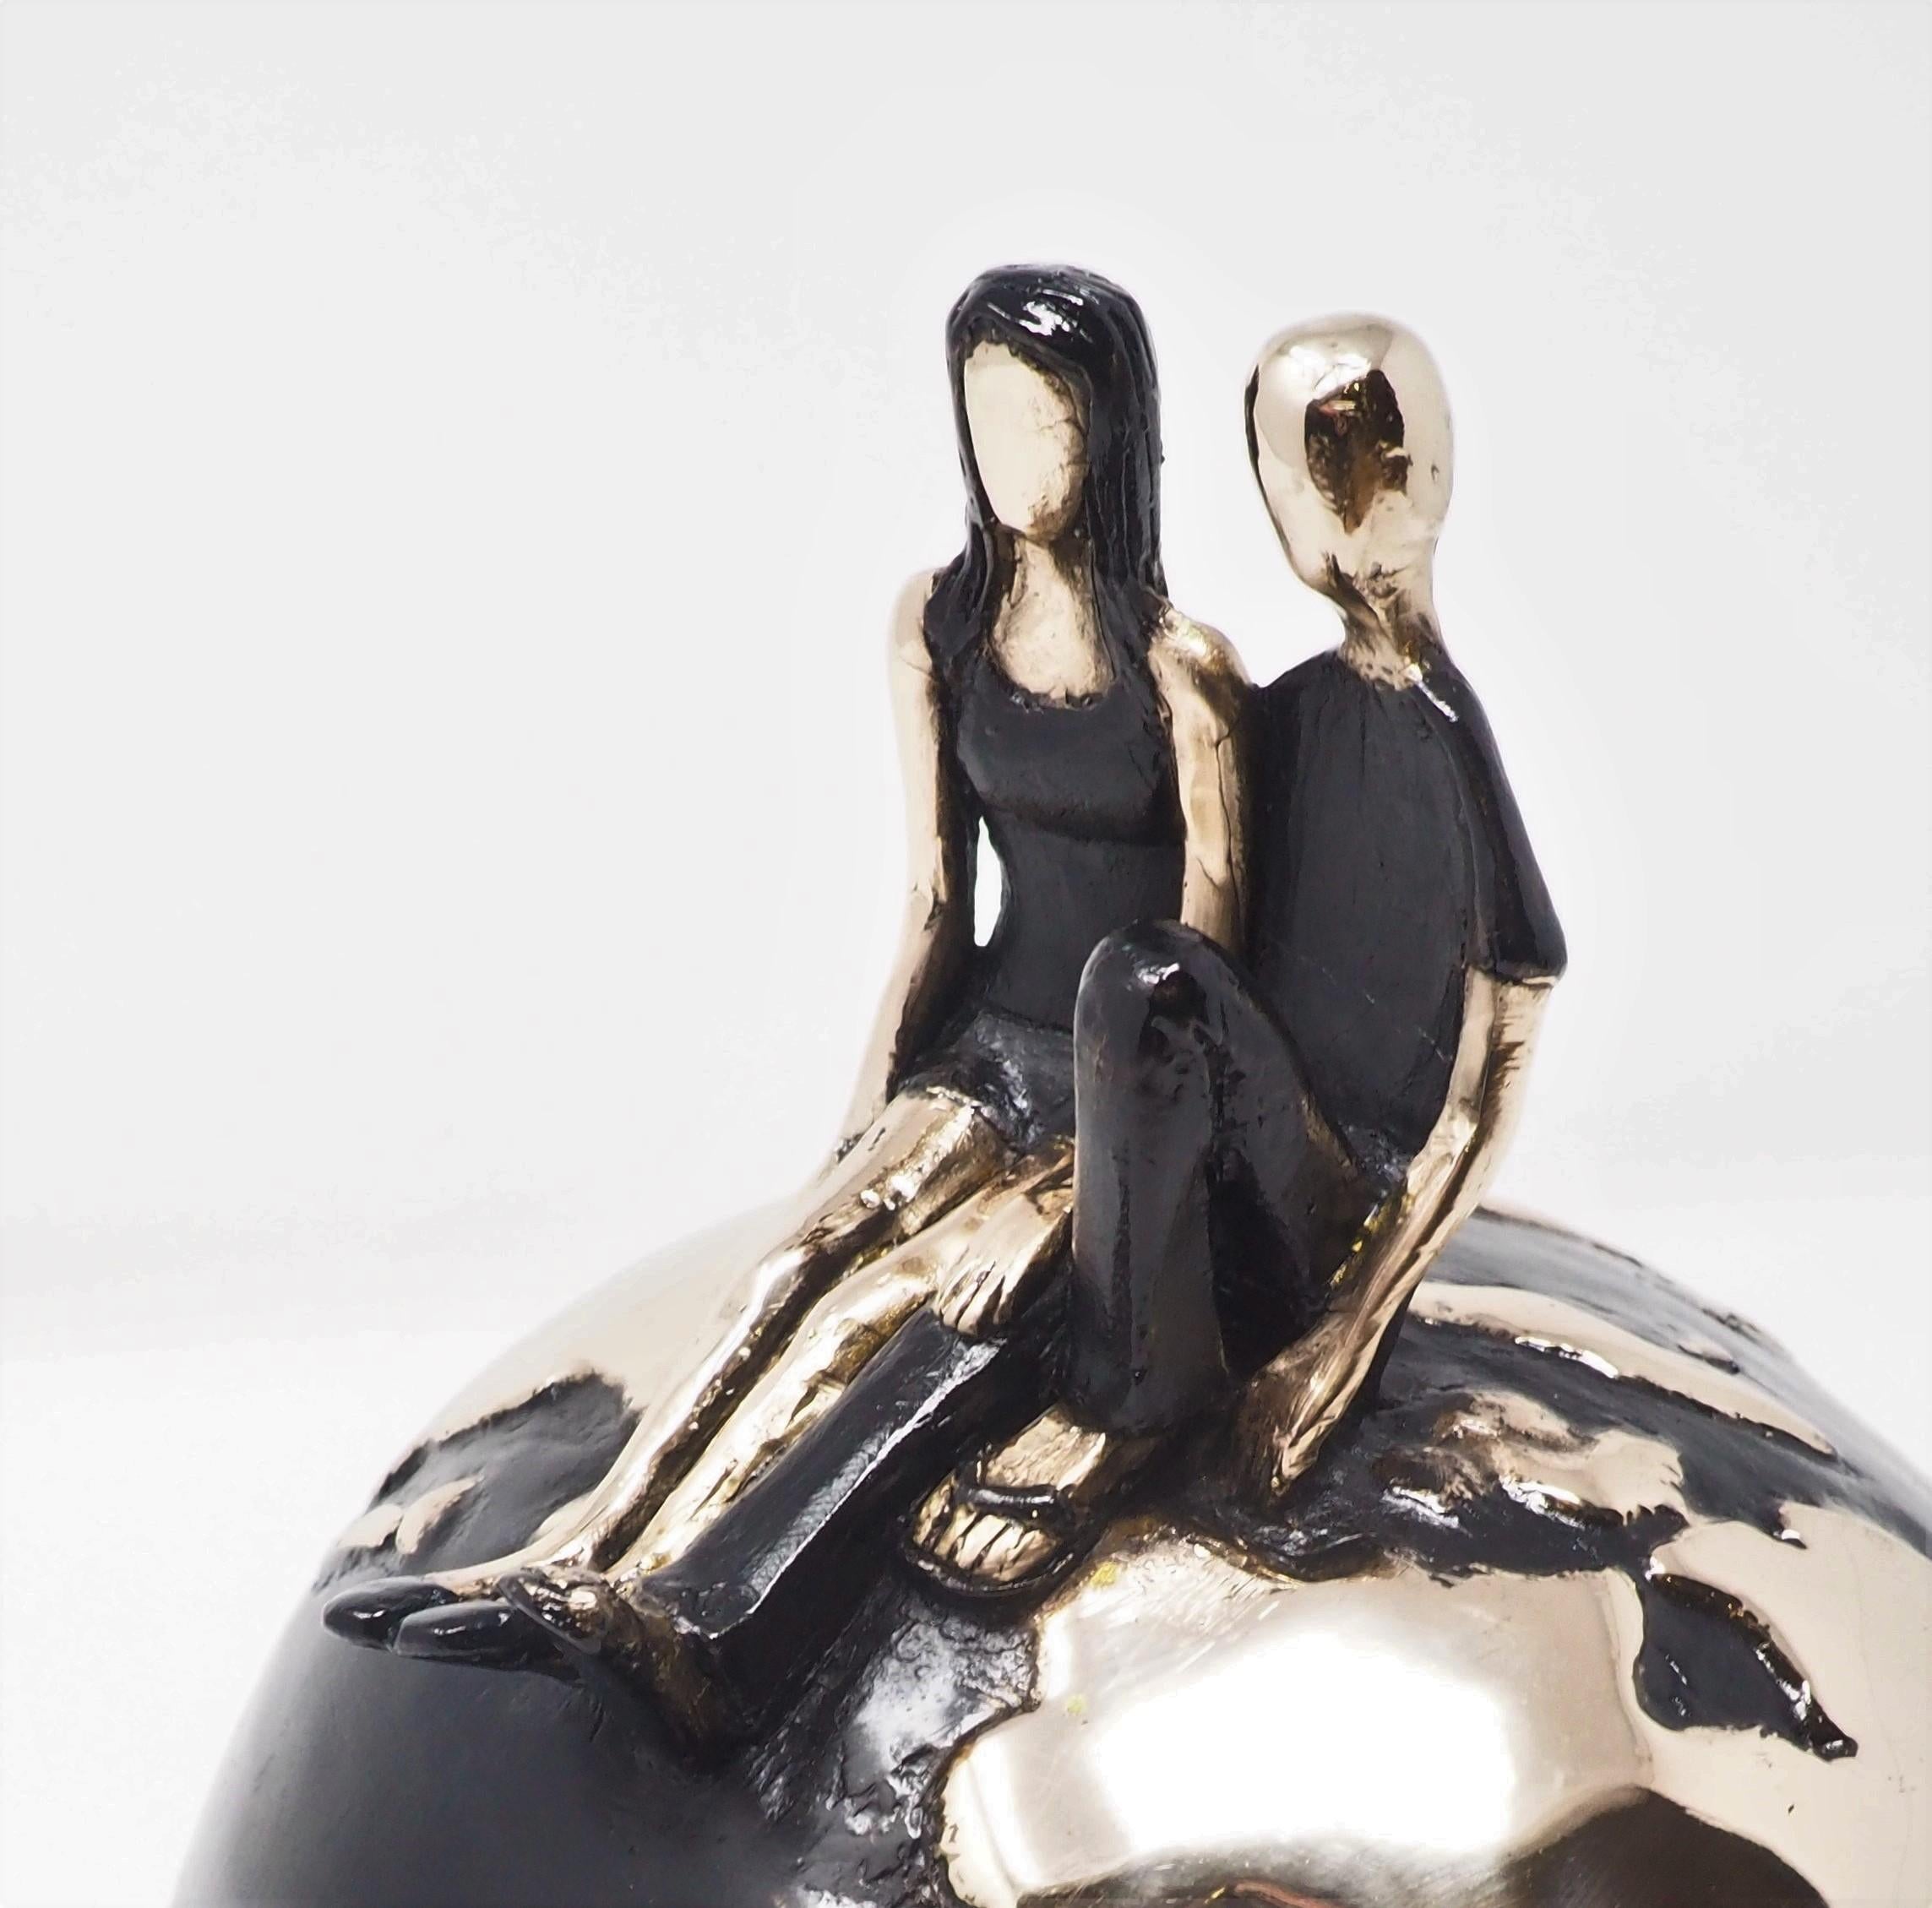 One World One Love Gold is the 2021 creation by Mireia Serra, as a continuation of her World Series depicting love and rapport of couples. This Gold edition of Mireia is made of bronze with black patina (the ocean) and polished bronze that gives the